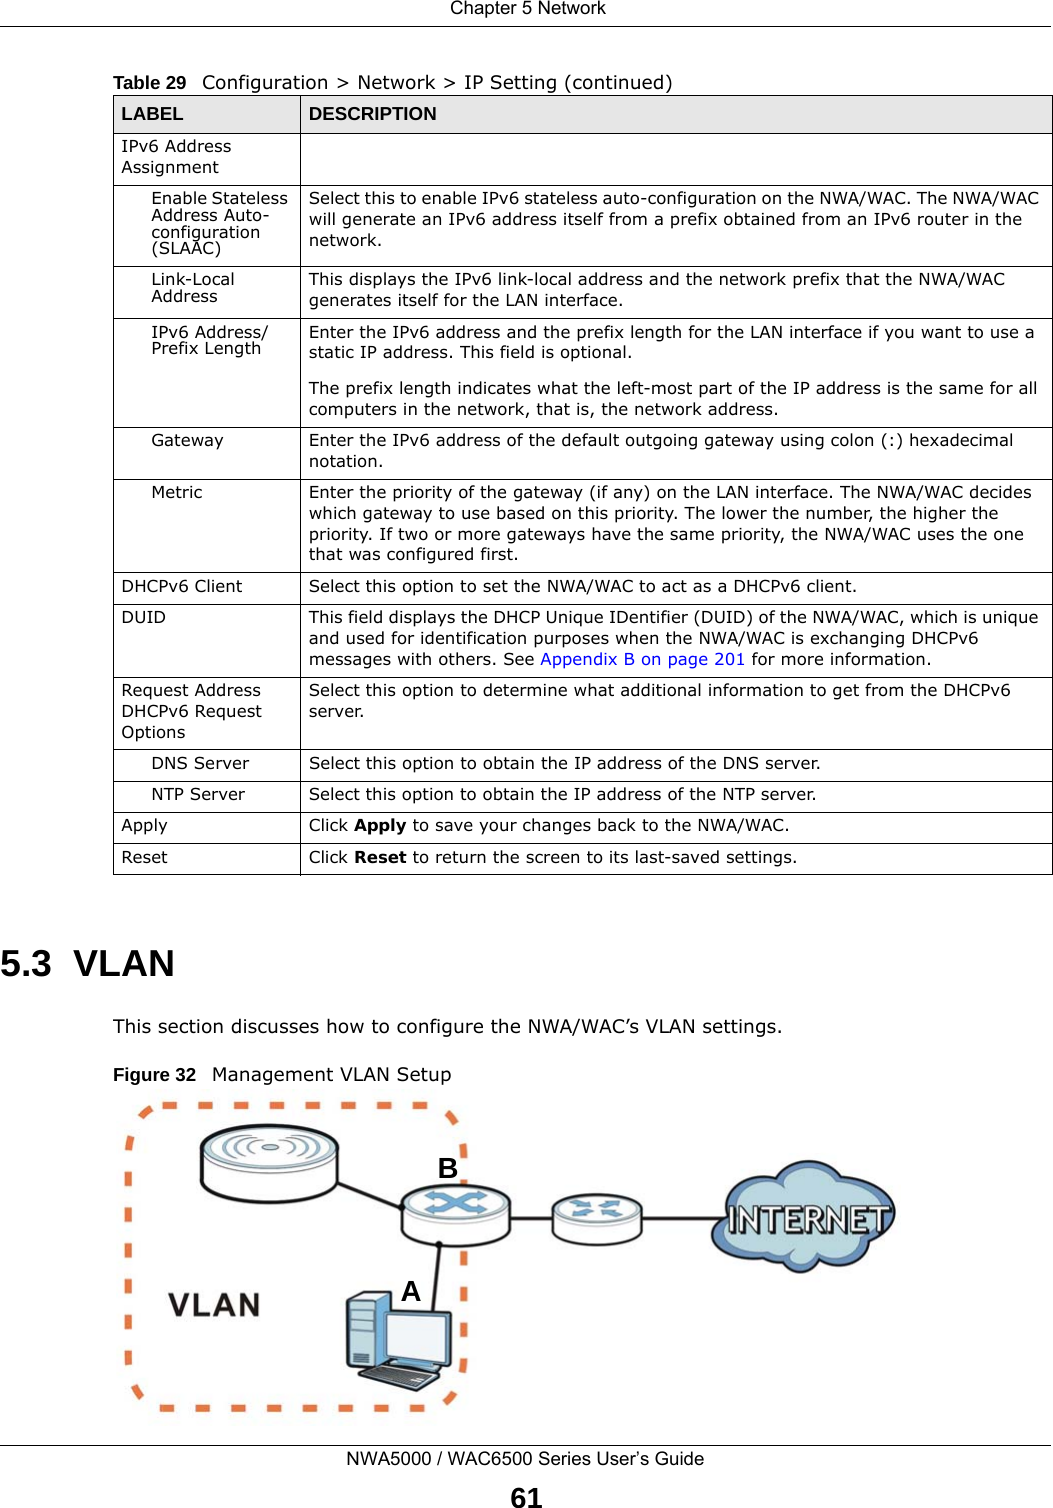  Chapter 5 NetworkNWA5000 / WAC6500 Series User’s Guide615.3  VLANThis section discusses how to configure the NWA/WAC’s VLAN settings.Figure 32   Management VLAN SetupIPv6 Address AssignmentEnable Stateless Address Auto-configuration (SLAAC)Select this to enable IPv6 stateless auto-configuration on the NWA/WAC. The NWA/WAC will generate an IPv6 address itself from a prefix obtained from an IPv6 router in the network.Link-Local Address This displays the IPv6 link-local address and the network prefix that the NWA/WAC generates itself for the LAN interface.IPv6 Address/Prefix Length Enter the IPv6 address and the prefix length for the LAN interface if you want to use a static IP address. This field is optional.The prefix length indicates what the left-most part of the IP address is the same for all computers in the network, that is, the network address.Gateway Enter the IPv6 address of the default outgoing gateway using colon (:) hexadecimal notation.Metric Enter the priority of the gateway (if any) on the LAN interface. The NWA/WAC decides which gateway to use based on this priority. The lower the number, the higher the priority. If two or more gateways have the same priority, the NWA/WAC uses the one that was configured first.DHCPv6 Client Select this option to set the NWA/WAC to act as a DHCPv6 client.DUID This field displays the DHCP Unique IDentifier (DUID) of the NWA/WAC, which is unique and used for identification purposes when the NWA/WAC is exchanging DHCPv6 messages with others. See Appendix B on page 201 for more information.Request Address DHCPv6 Request OptionsSelect this option to determine what additional information to get from the DHCPv6 server. DNS Server Select this option to obtain the IP address of the DNS server.NTP Server Select this option to obtain the IP address of the NTP server.Apply Click Apply to save your changes back to the NWA/WAC.Reset Click Reset to return the screen to its last-saved settings. Table 29   Configuration &gt; Network &gt; IP Setting (continued)LABEL  DESCRIPTIONAB